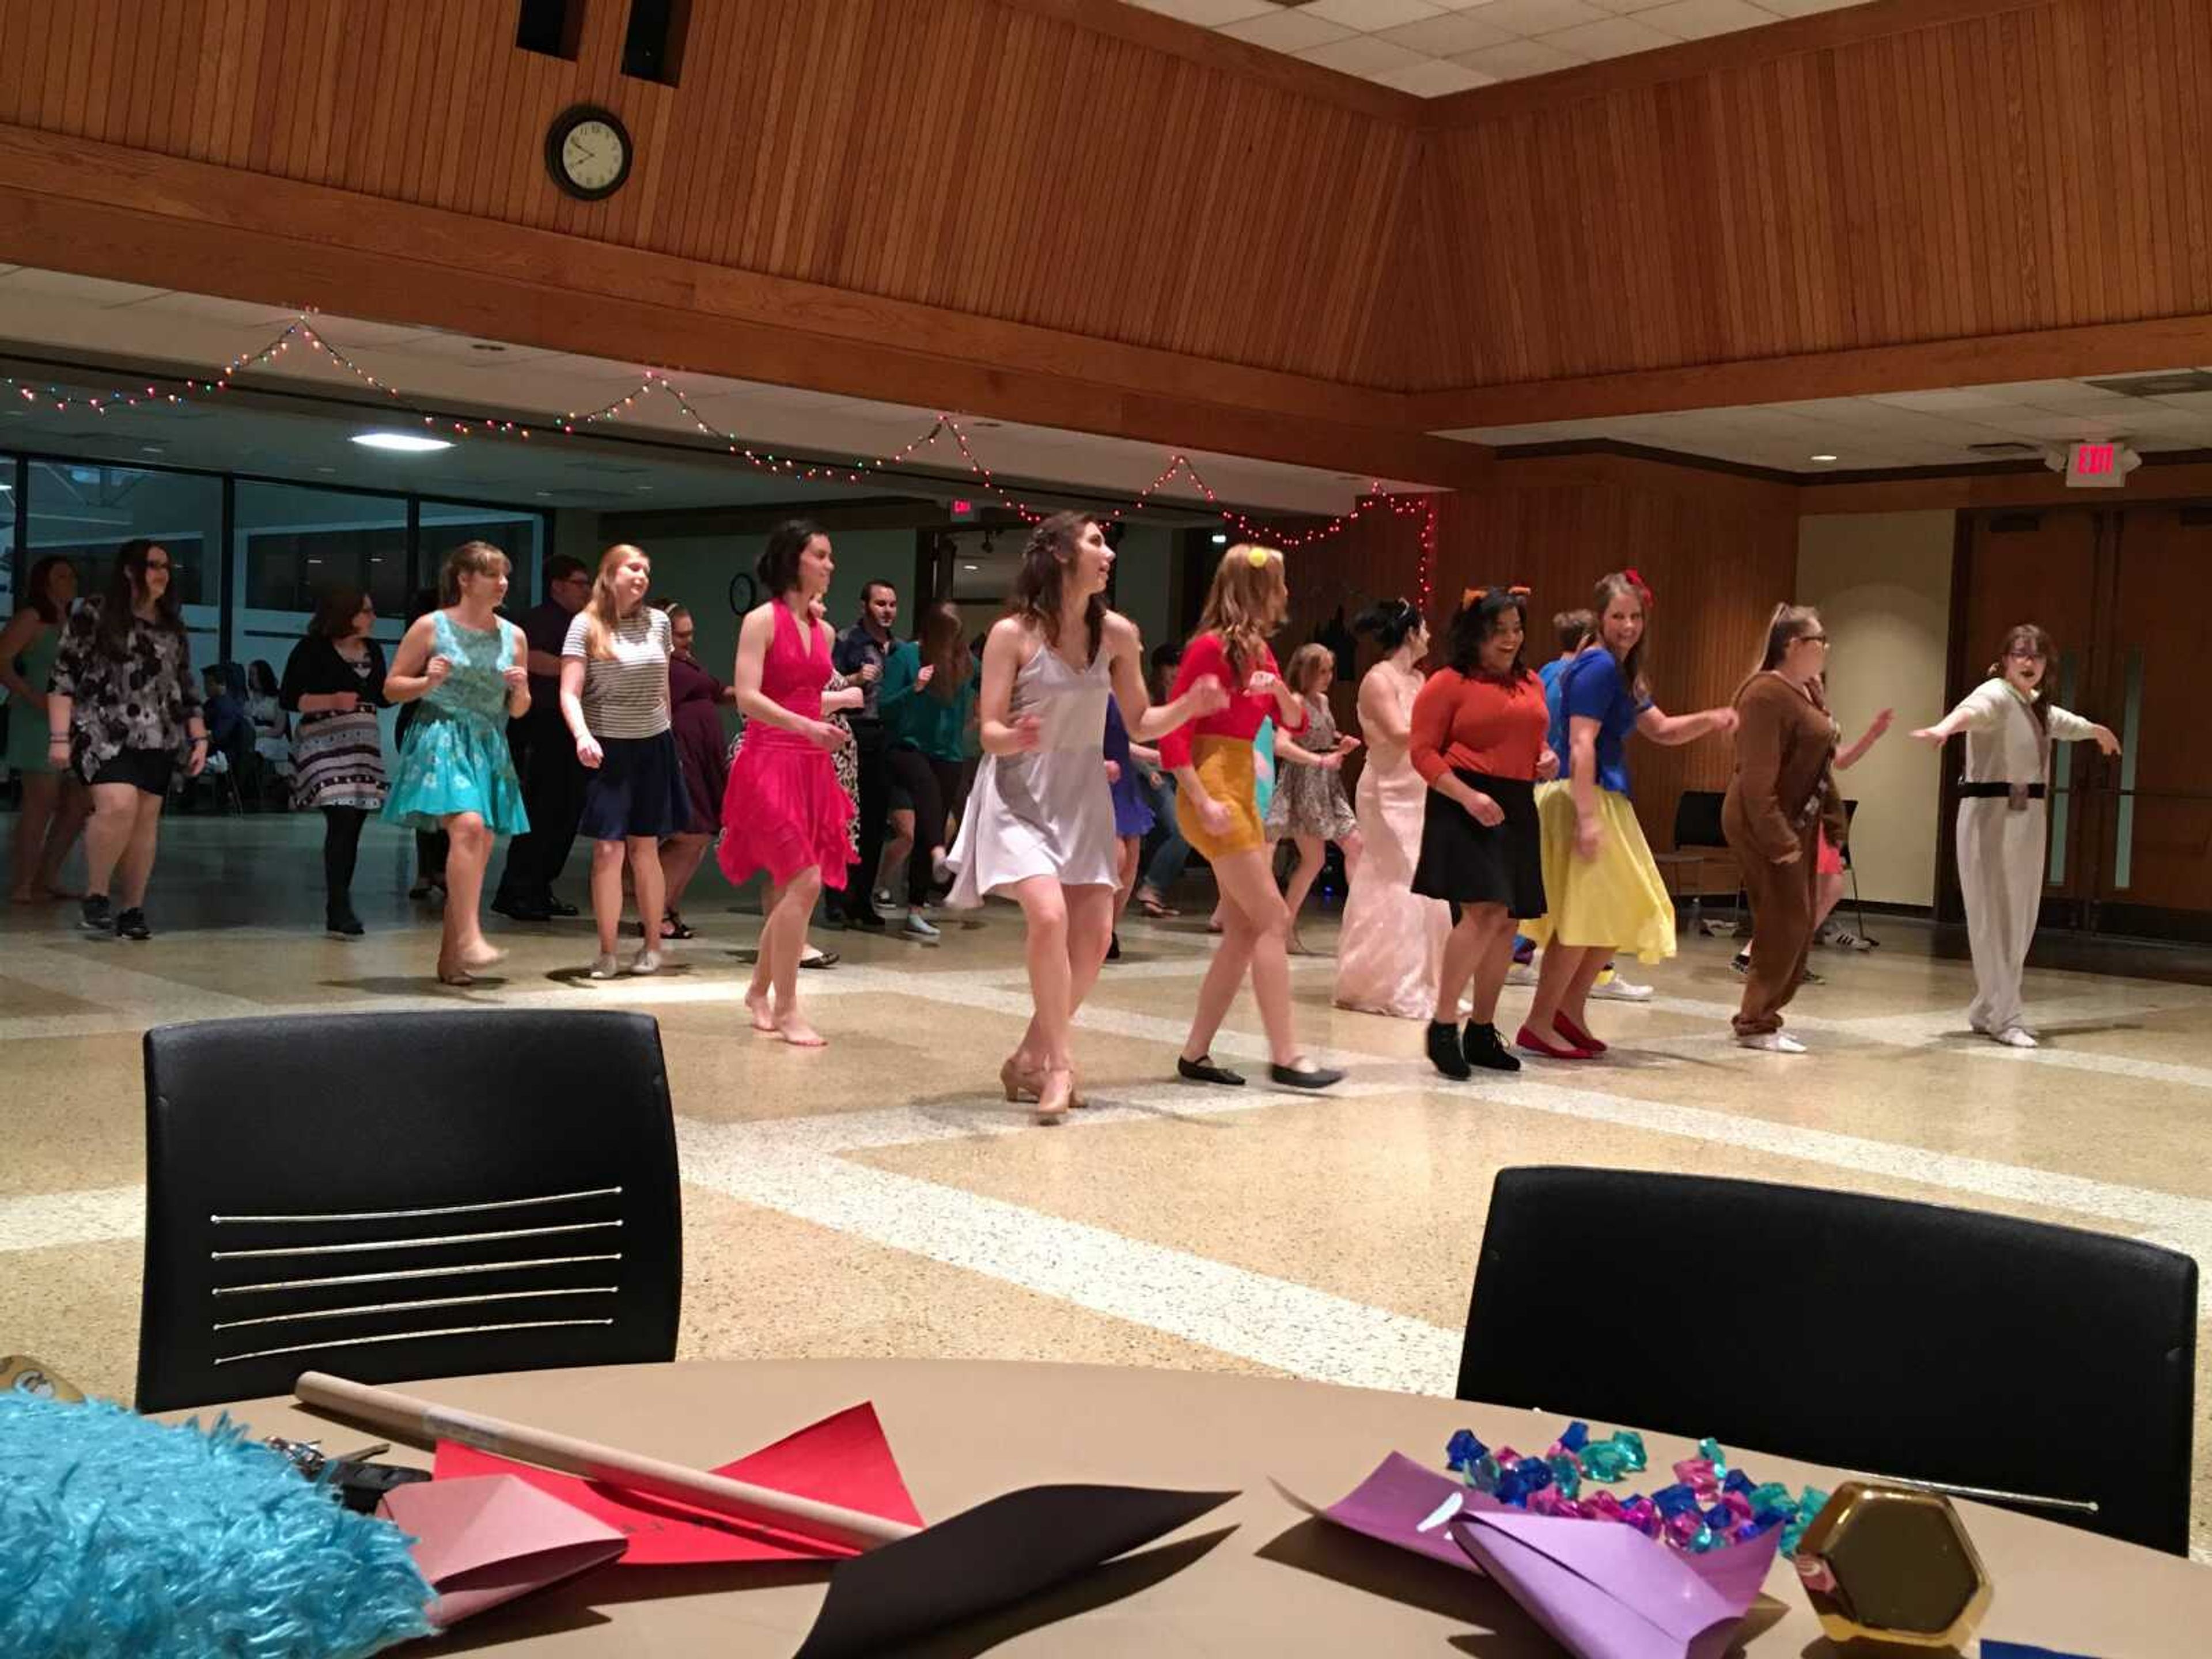 Attendees dressed up to the Disney Theme and all danced together.